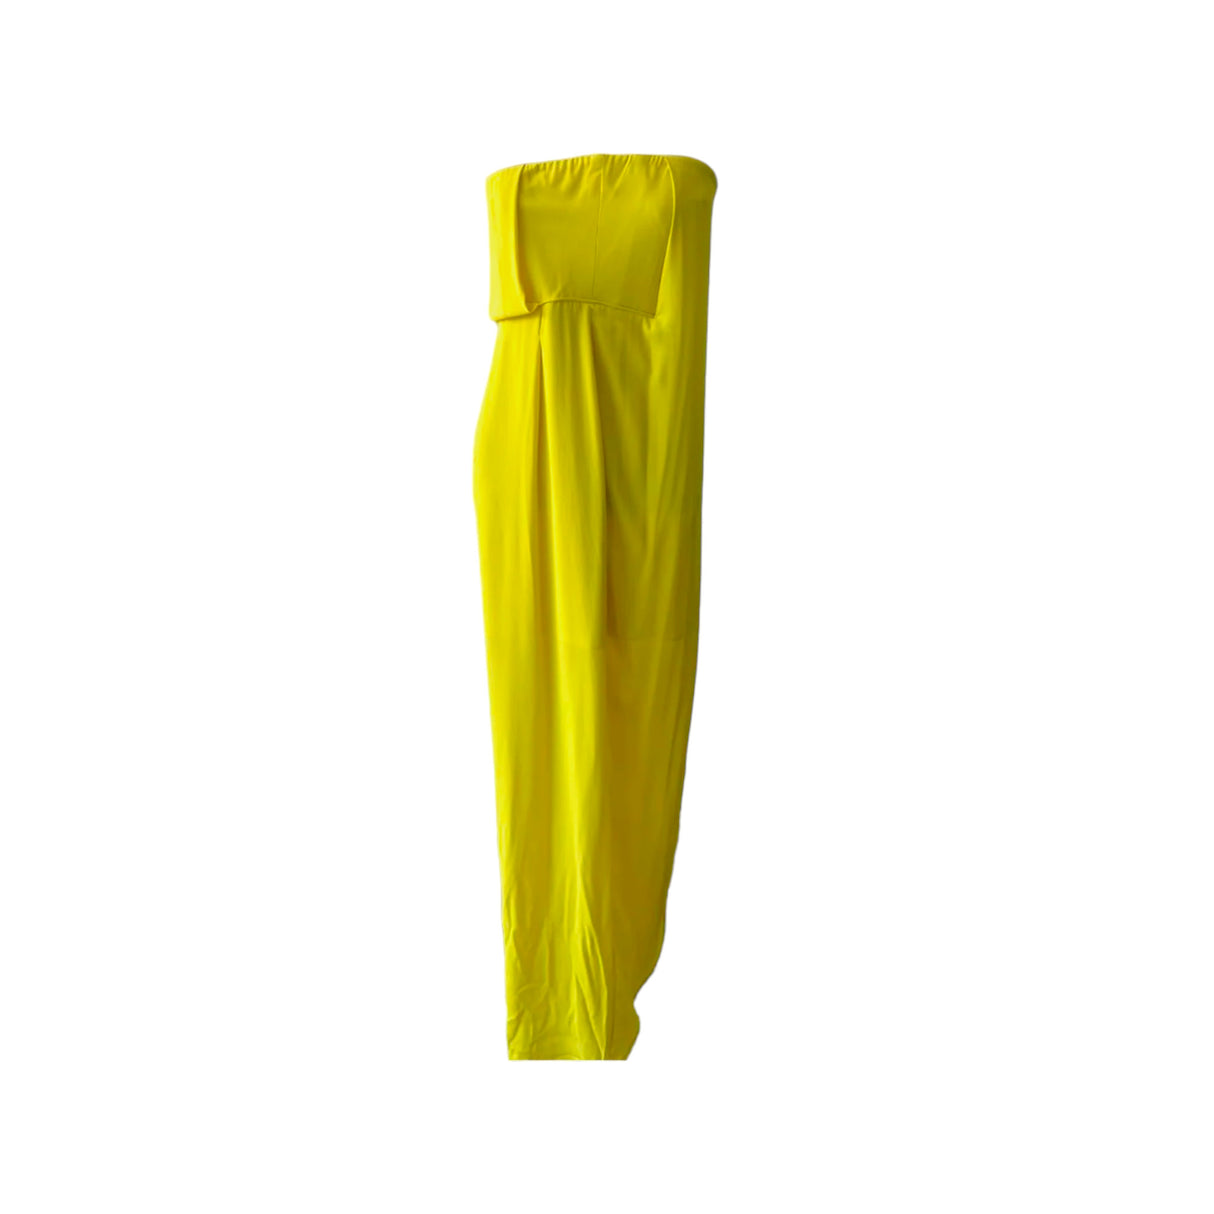 Brand-New BCBGMAXAZRIA Long Yellow Dress - Size S | With Tags | A Second Chance Thrift Store